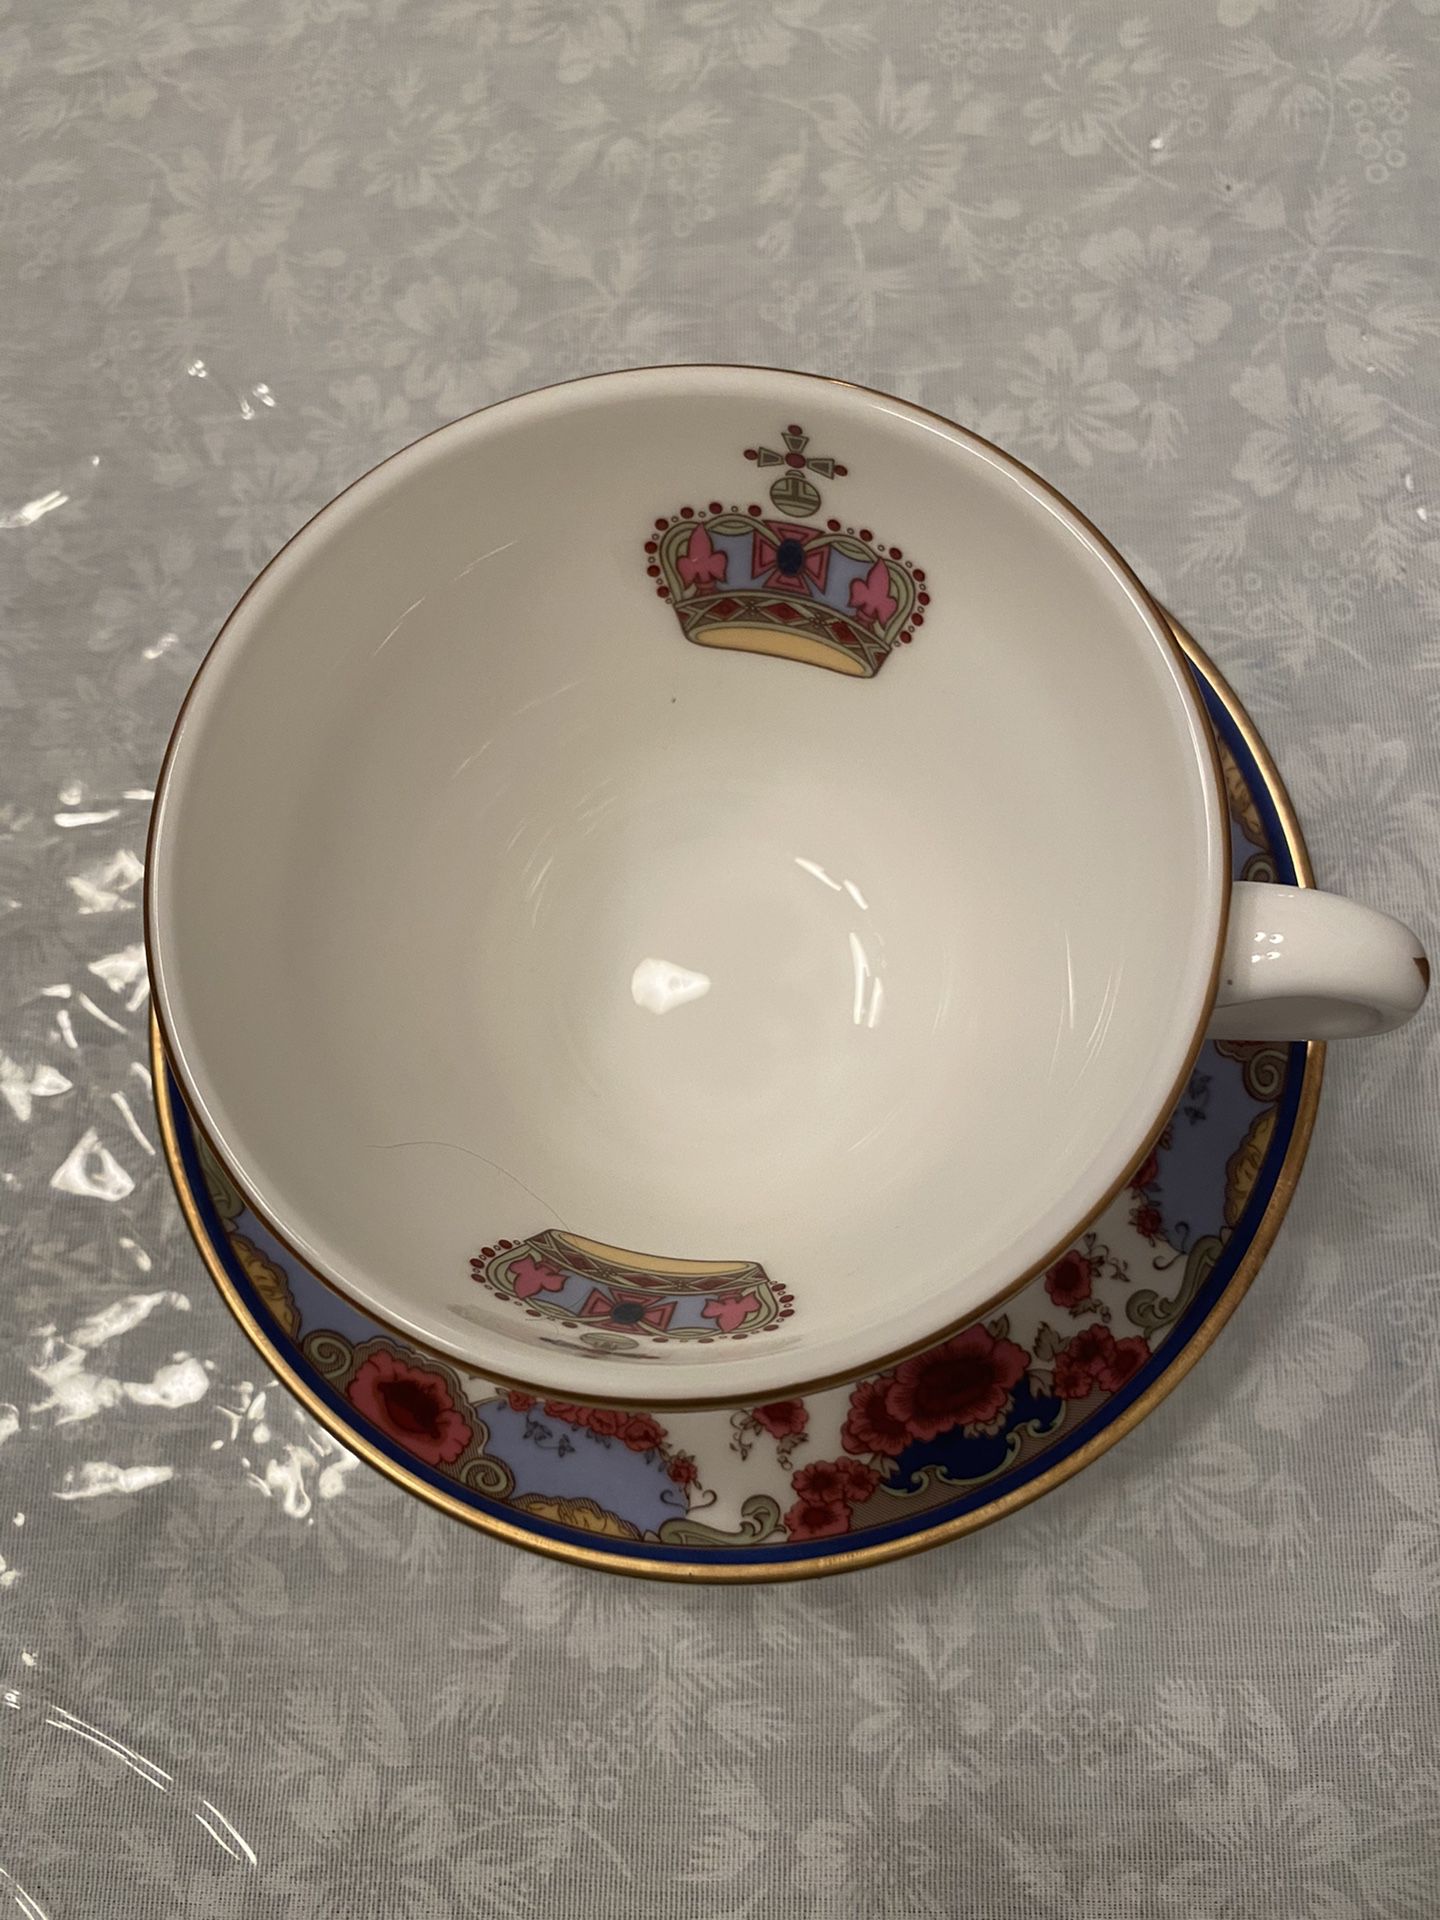 Antique, Royal Doulton cup and saucer, Rare. Made in England